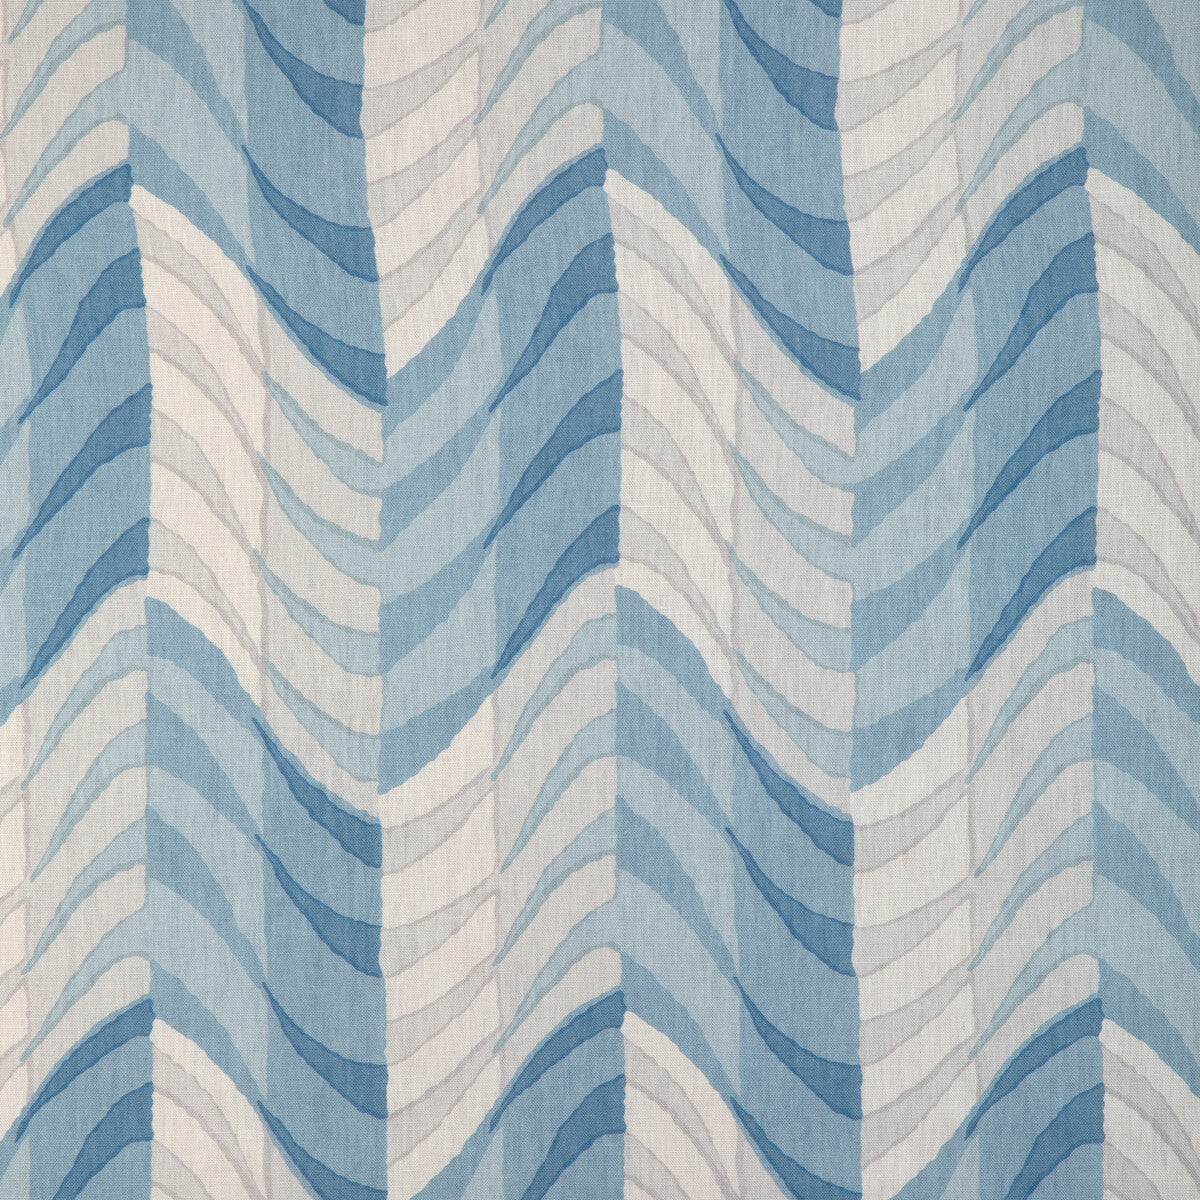 Undulation fabric in ocean color - pattern UNDULATION.5.0 - by Kravet Basics in the Mid-Century Modern collection